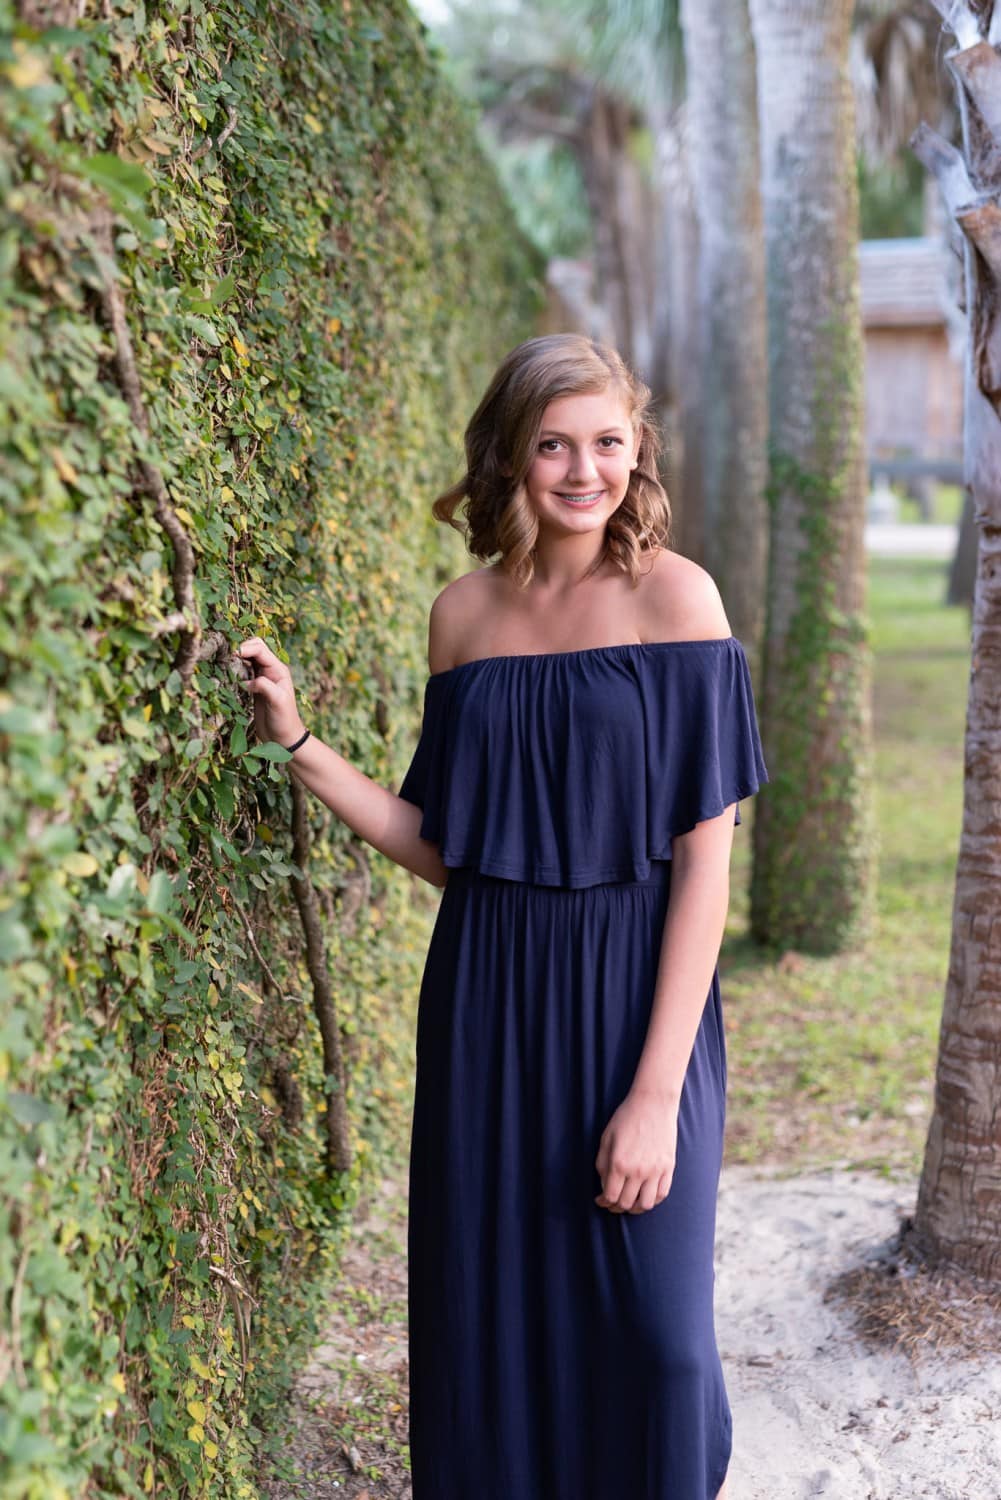 Portraits by the ivy covered wall of the Atalaya Castle - Huntington Beach State Park